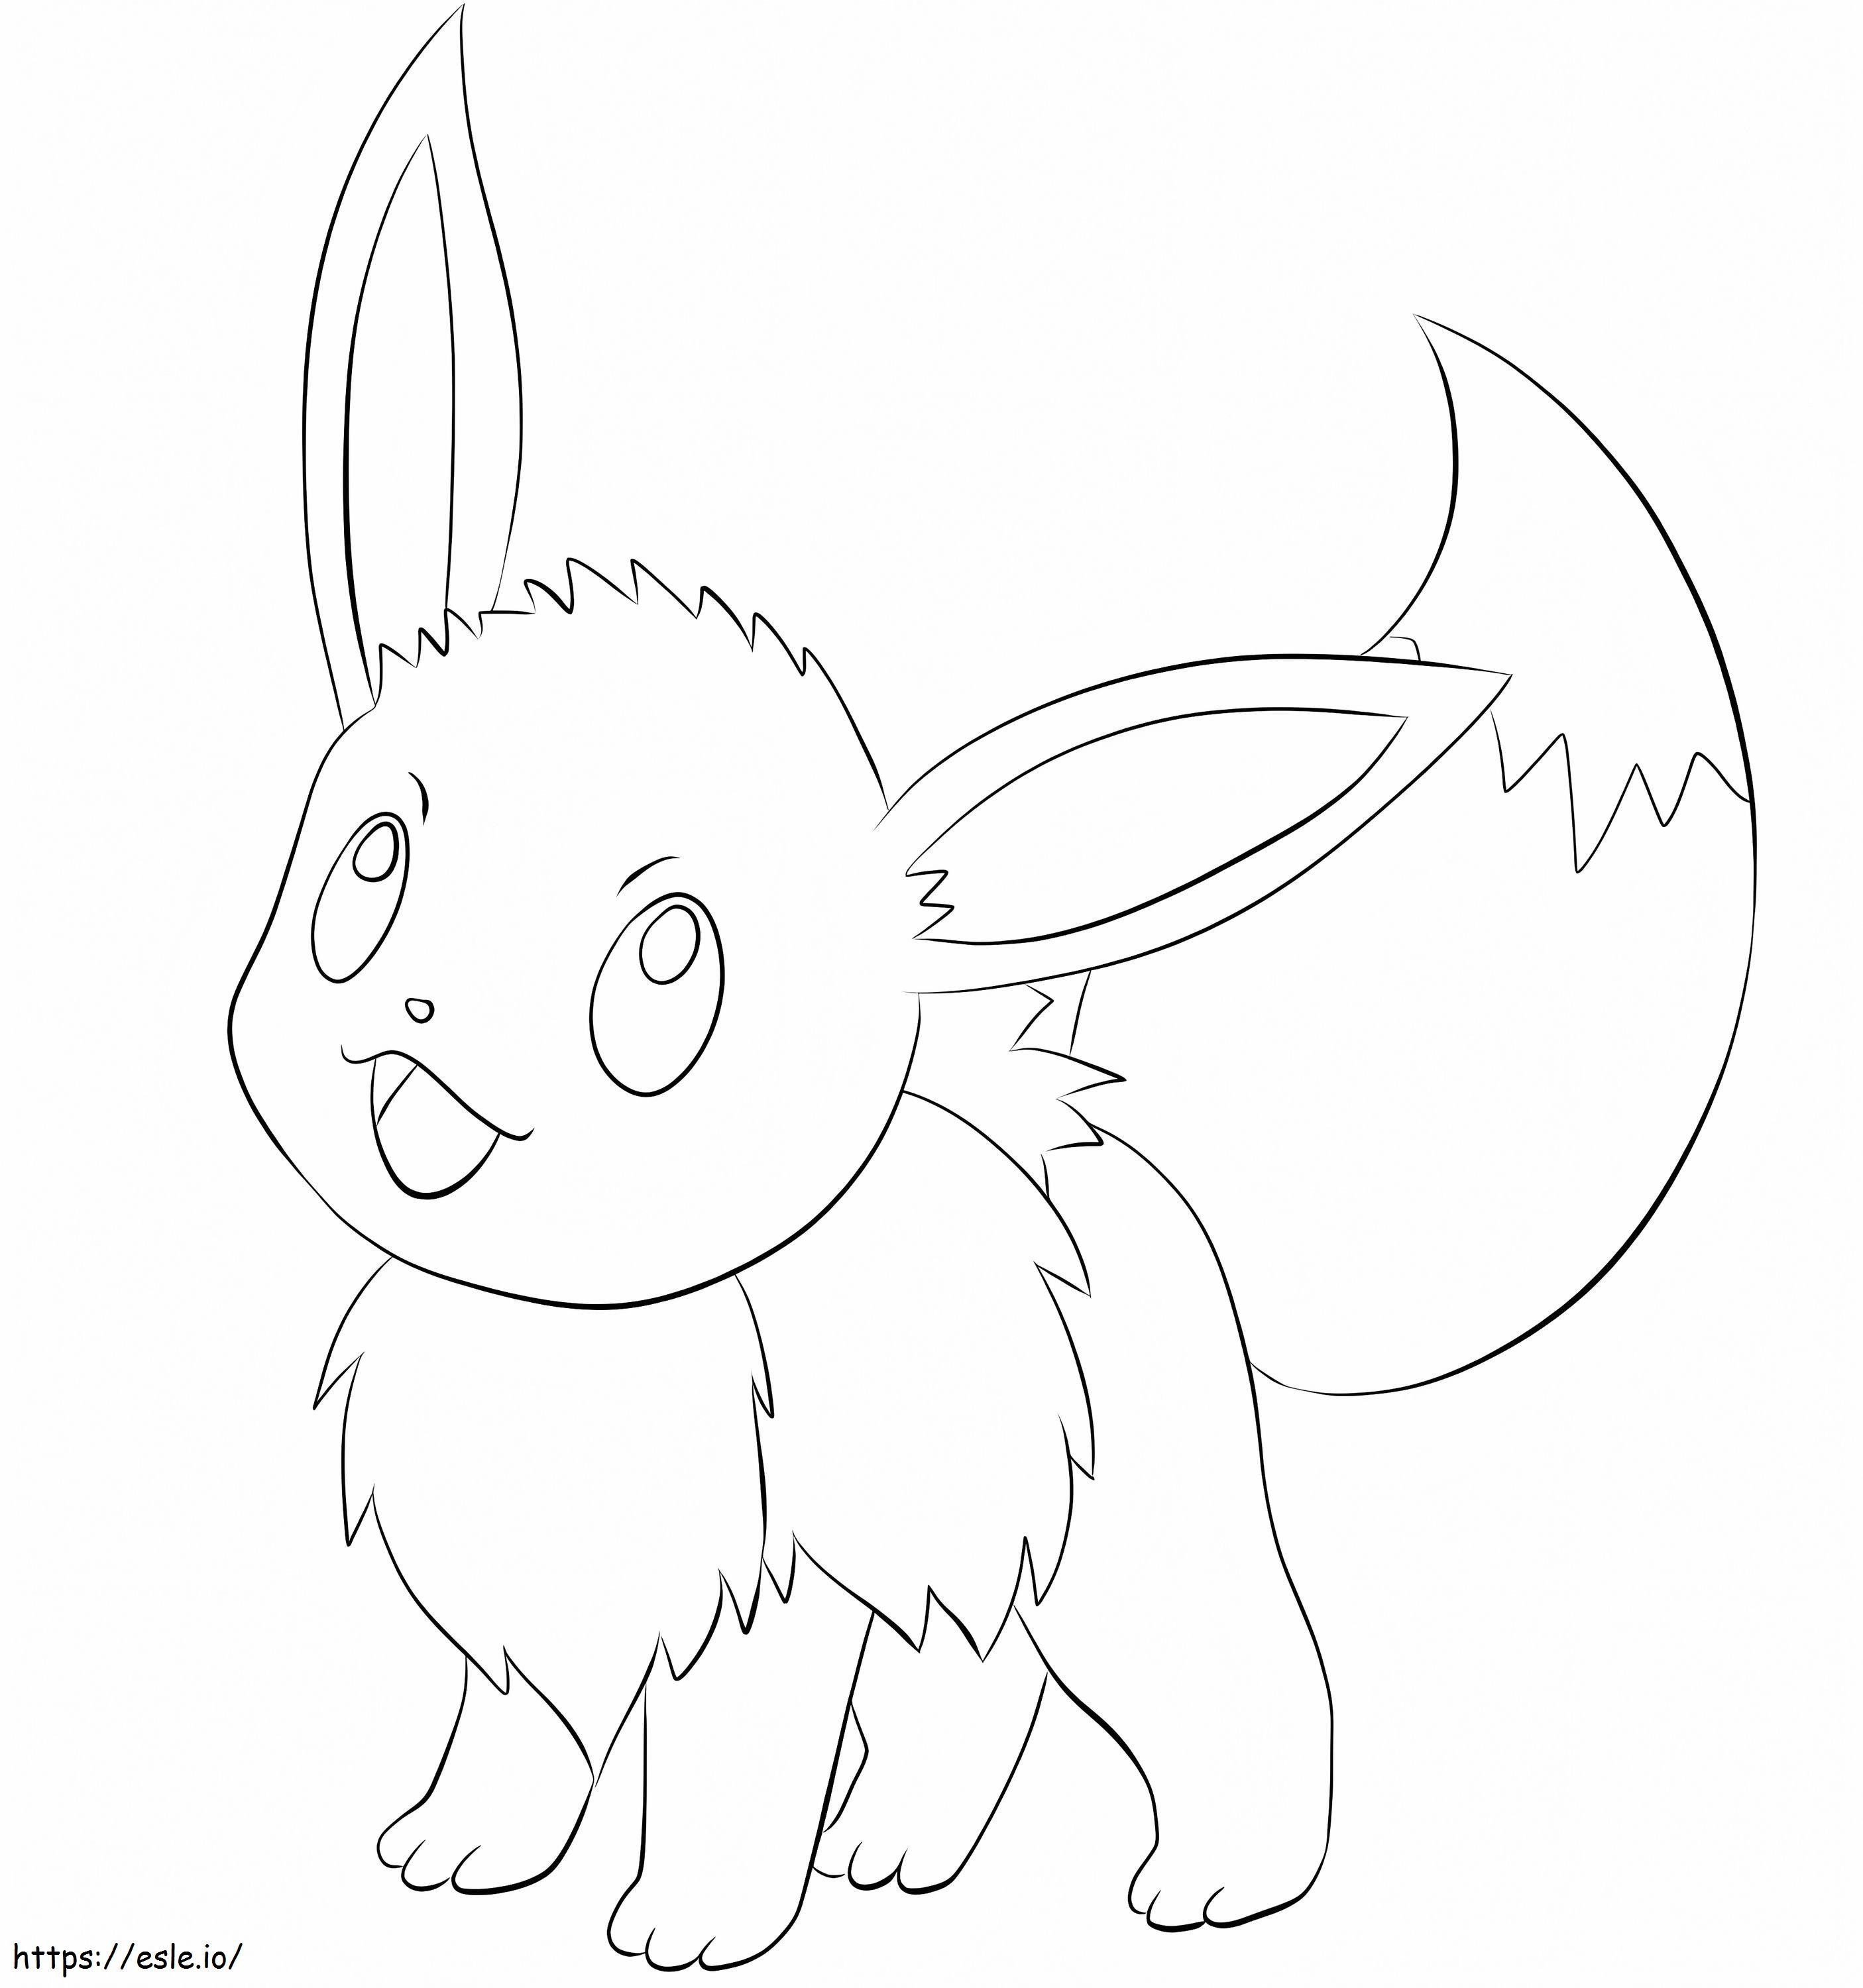 Pokemon Eevee Smiling coloring page